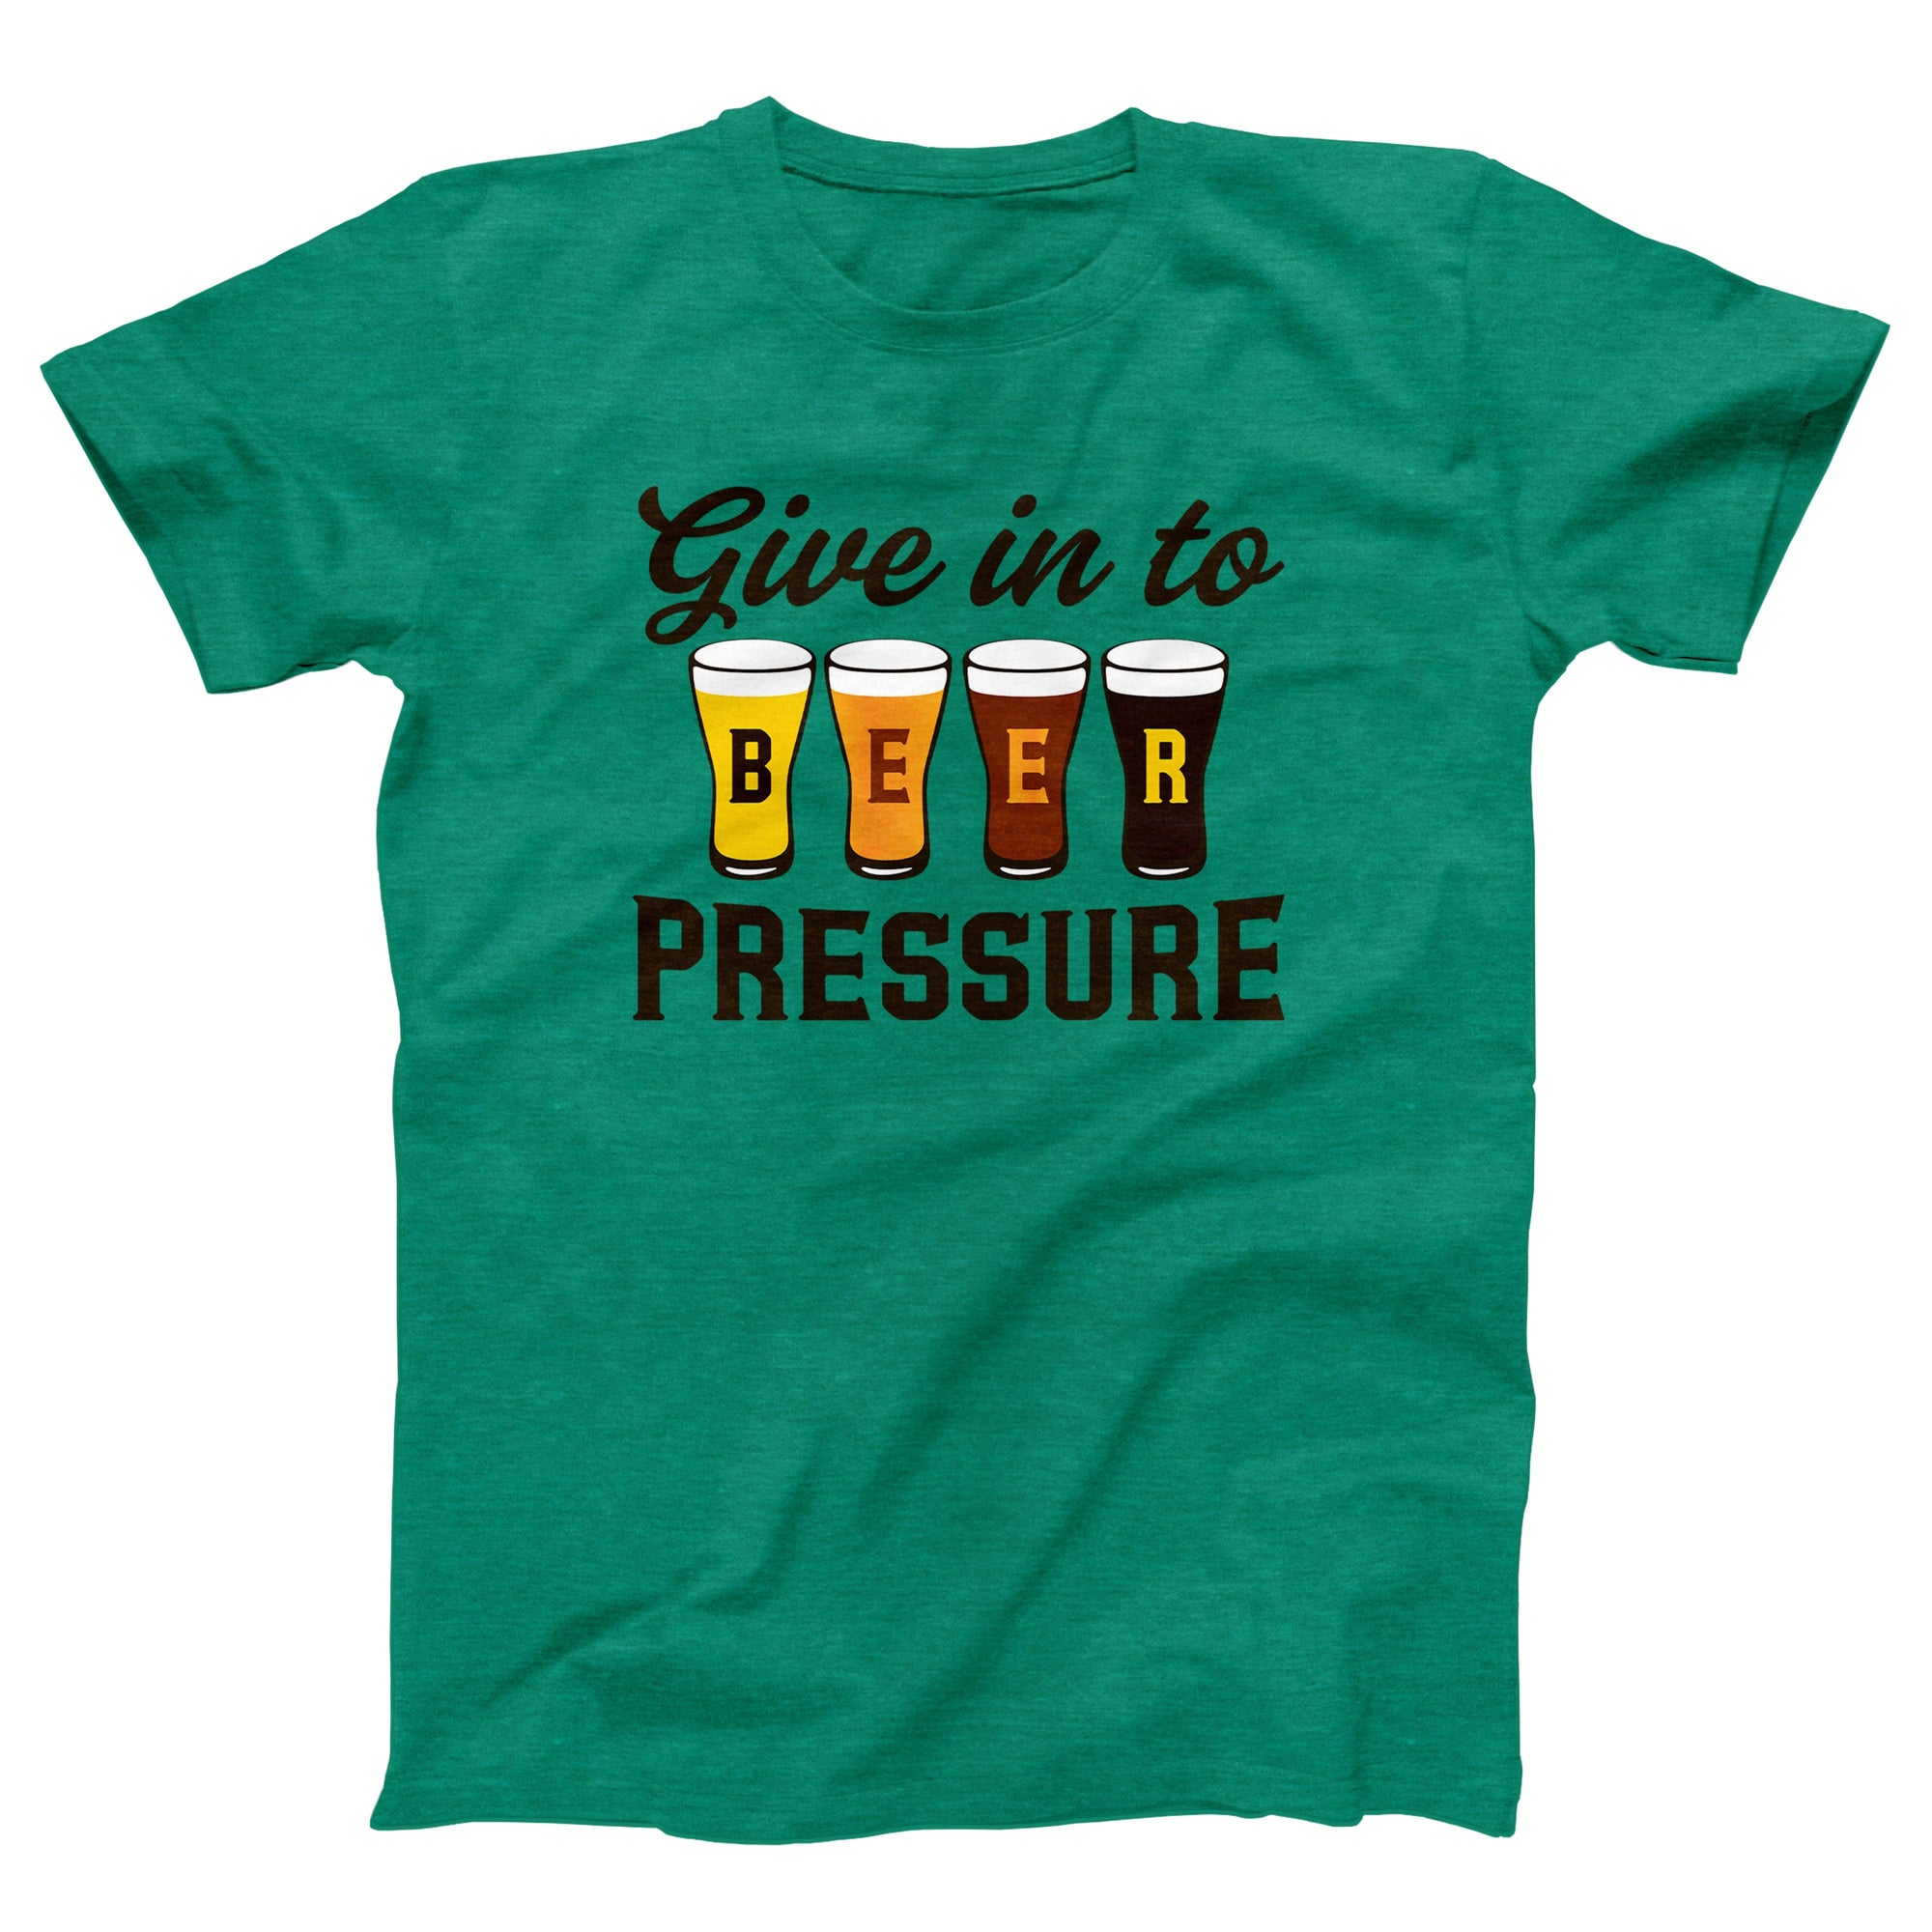 Give In To Beer Pressure Adult Unisex T-Shirt - Twisted Gorilla